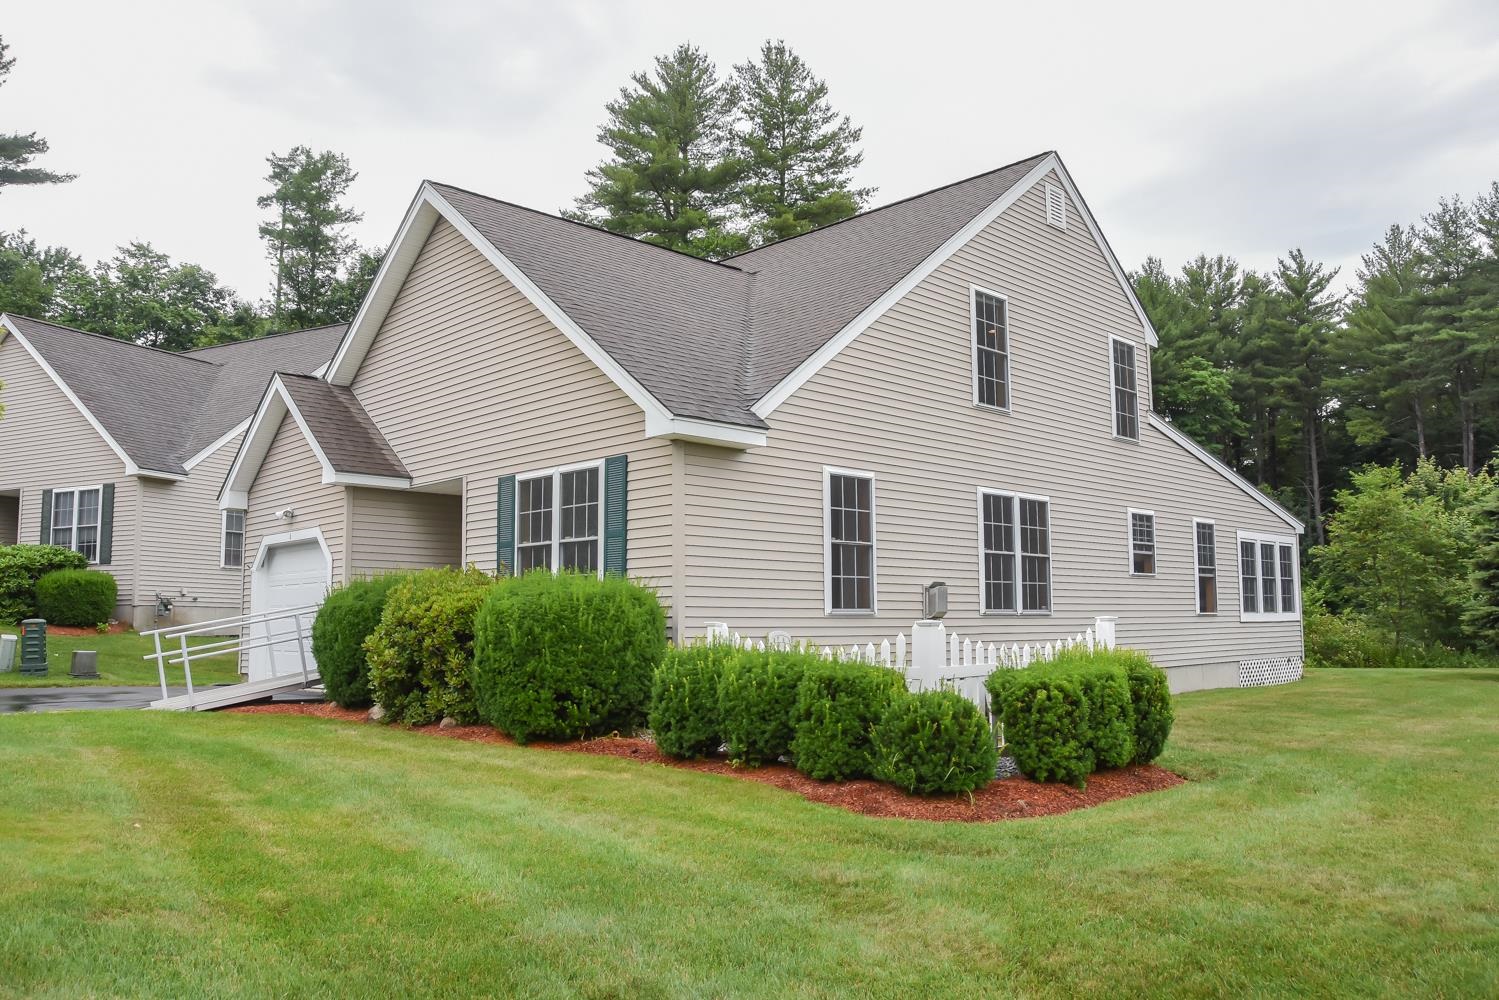 1 Gerry's Way, Milford, NH 03055